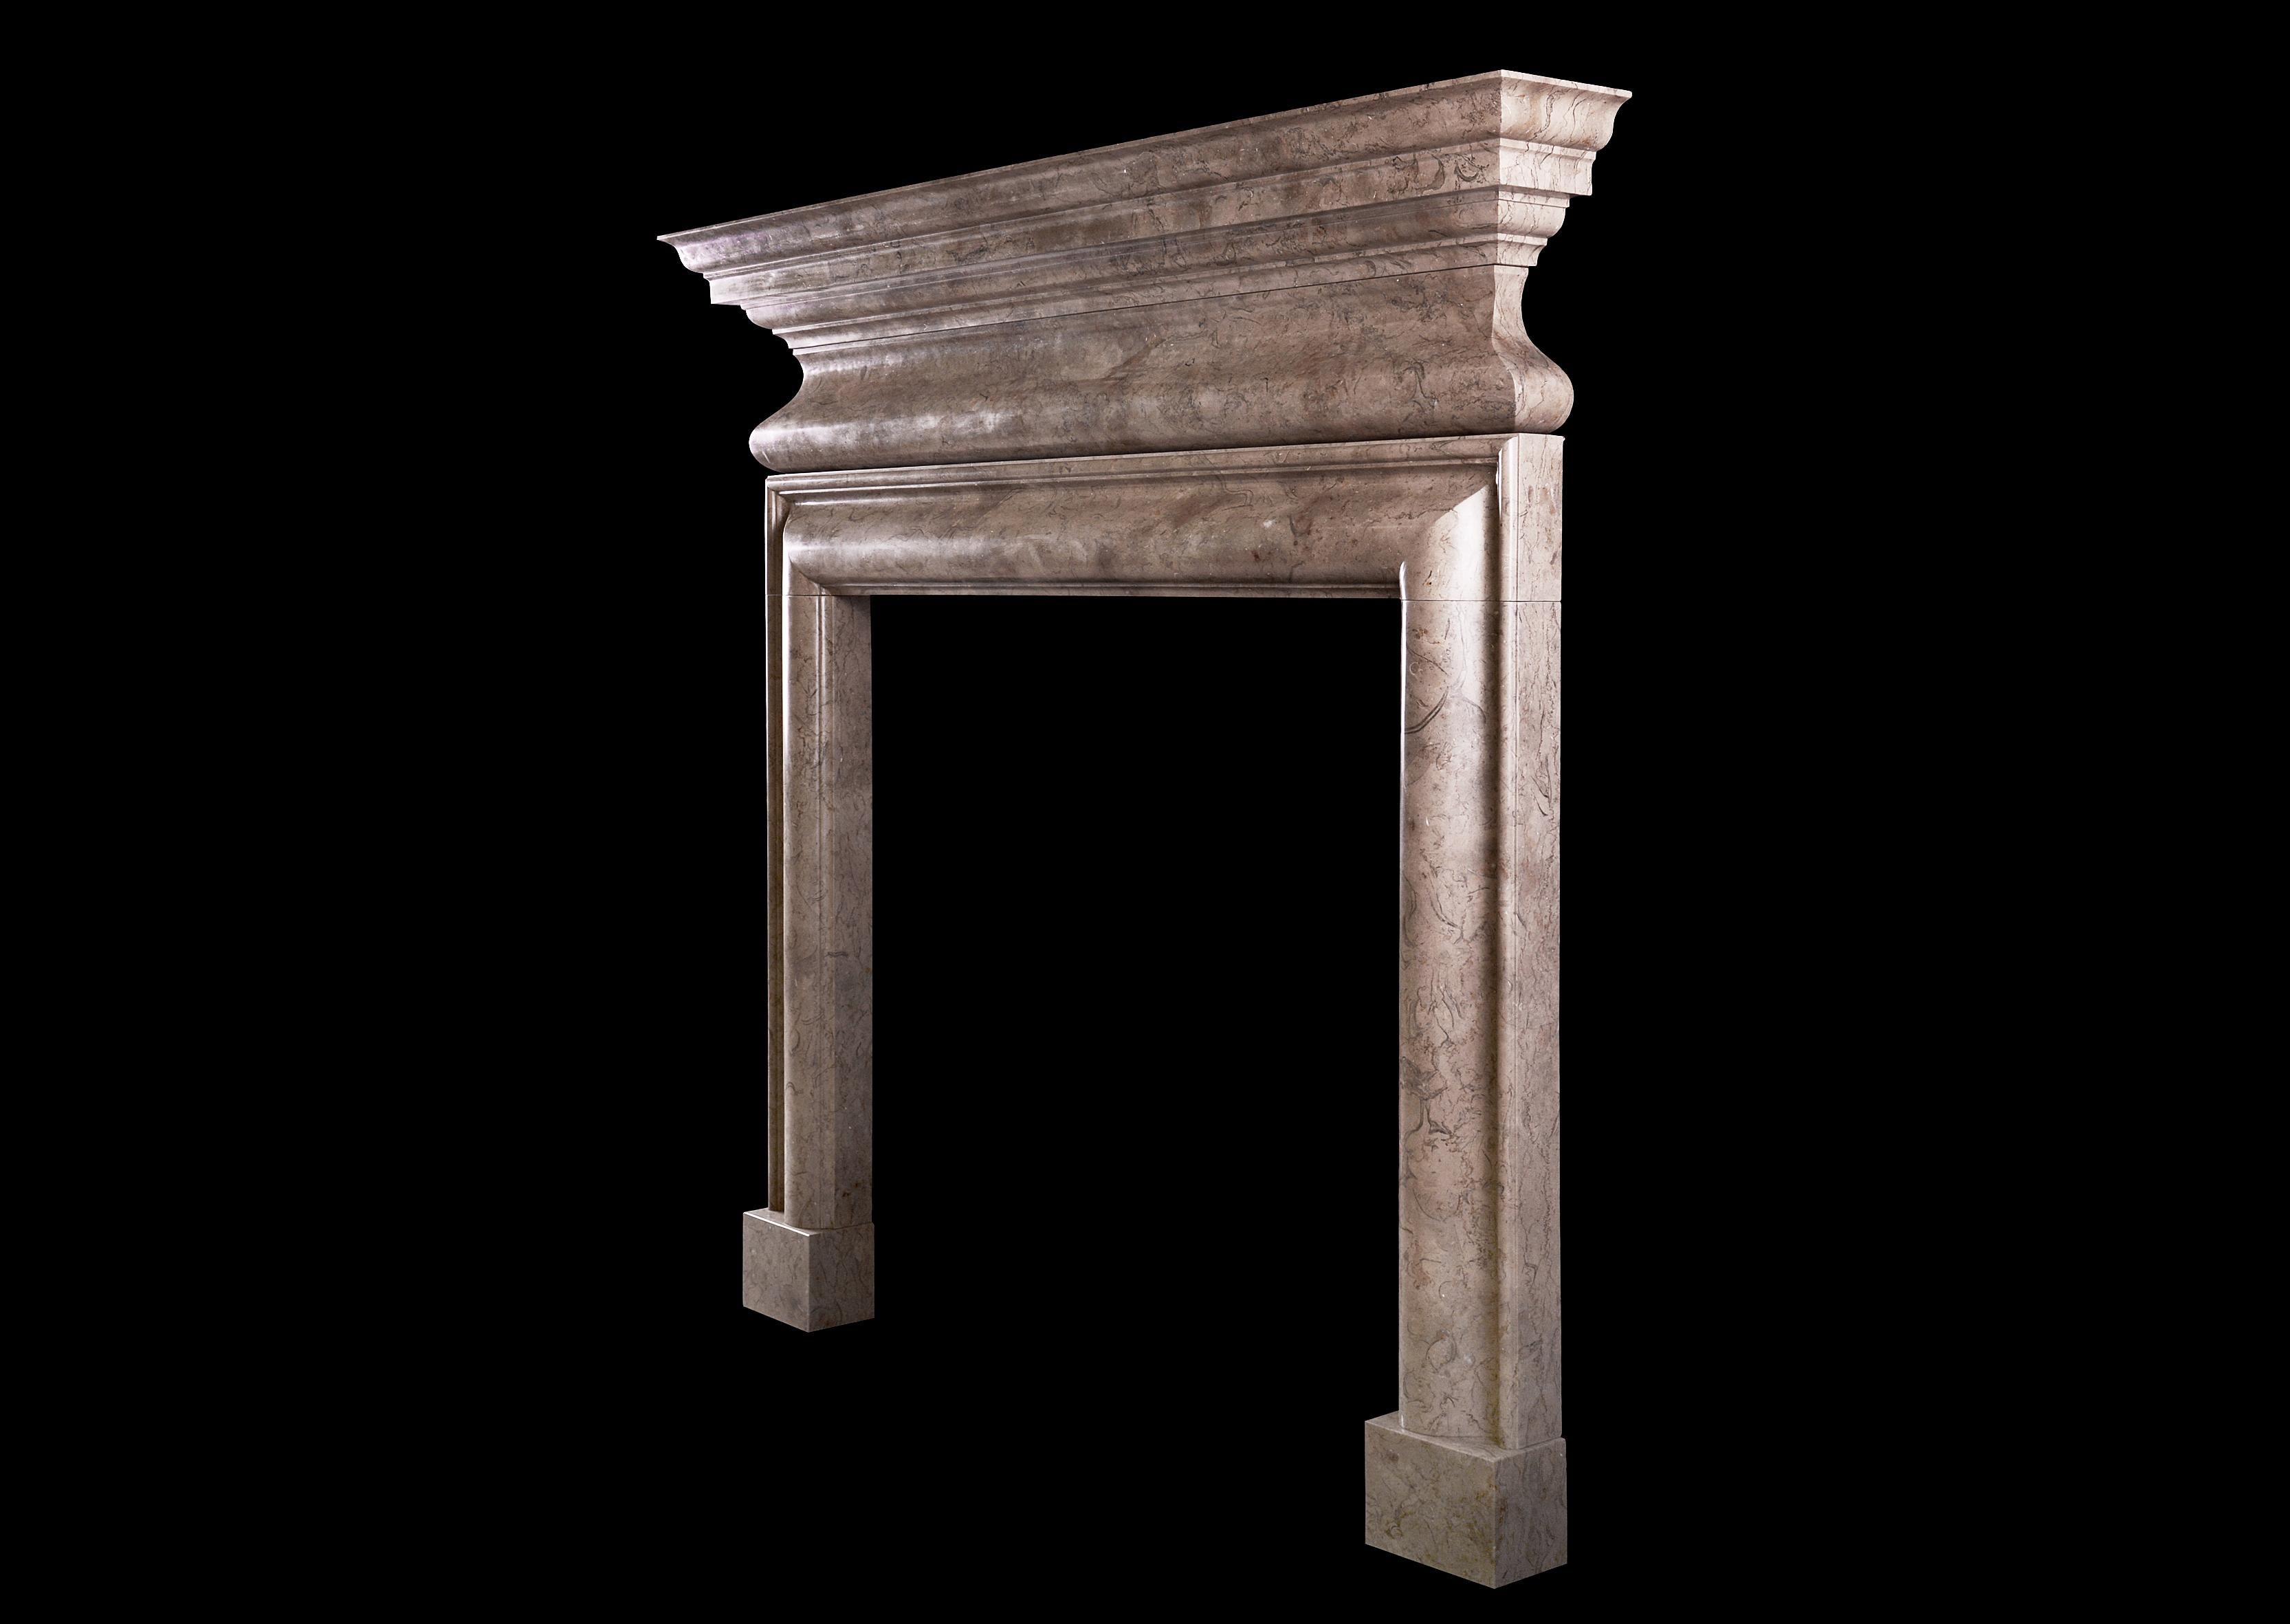 Georgian Stylish Architectural Fireplace, a Copy of an Original by Sir Edwin Lutyens For Sale